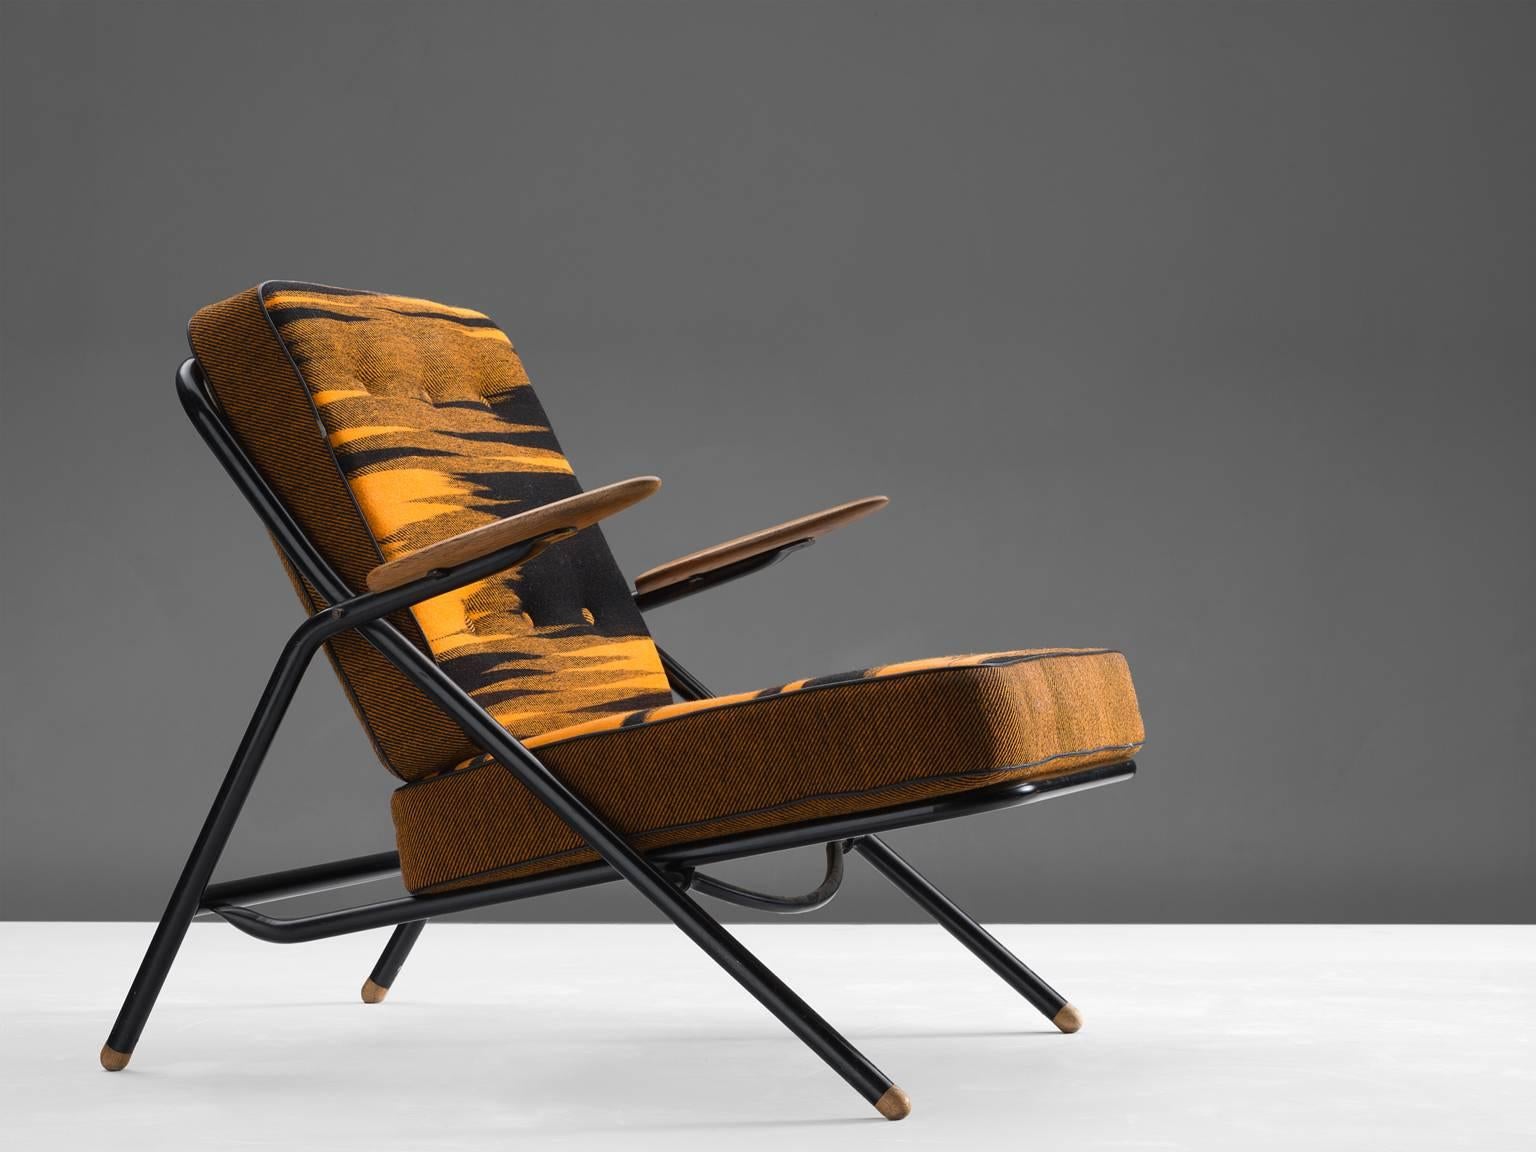 Sawbuck chair GE215 by Hans J. Wegner in original upholstery, Denmark, 1955.

Iconic 'W' Sawbuck chair by Danish designer Hans Wegner. This chair was shown at the 1955 great Nordic design exhibition in Helsingborg, Sweden. In this Wegner combined